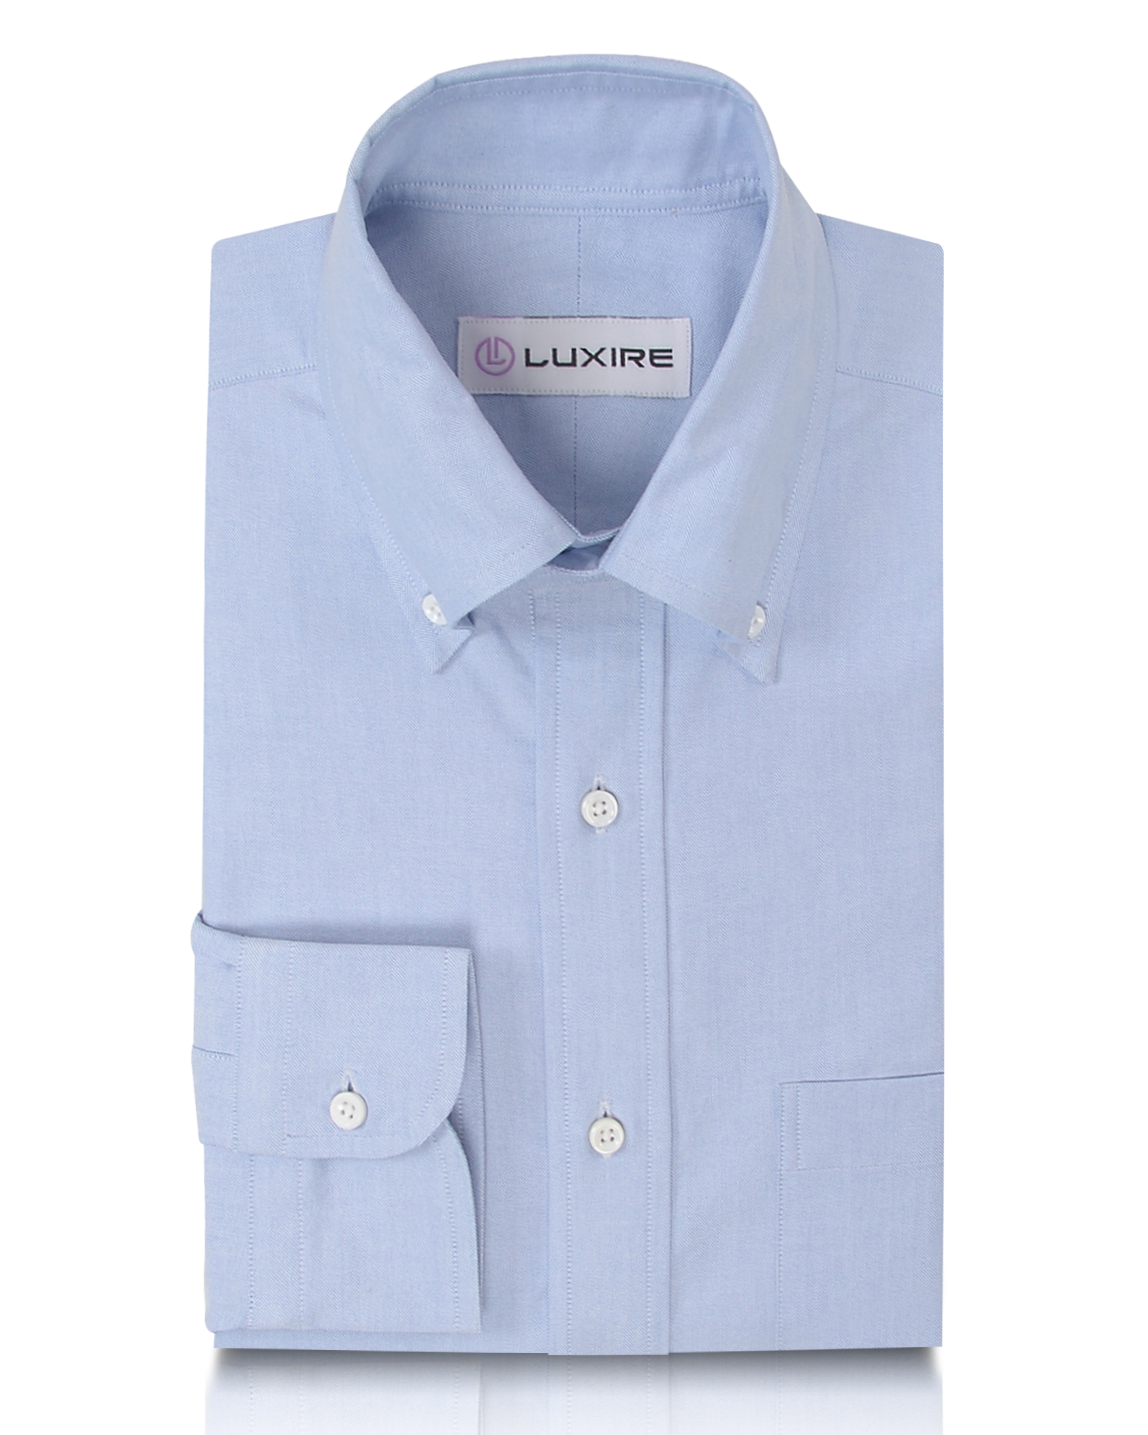 Front of the custom oxford shirt for men by Luxire in sky blue